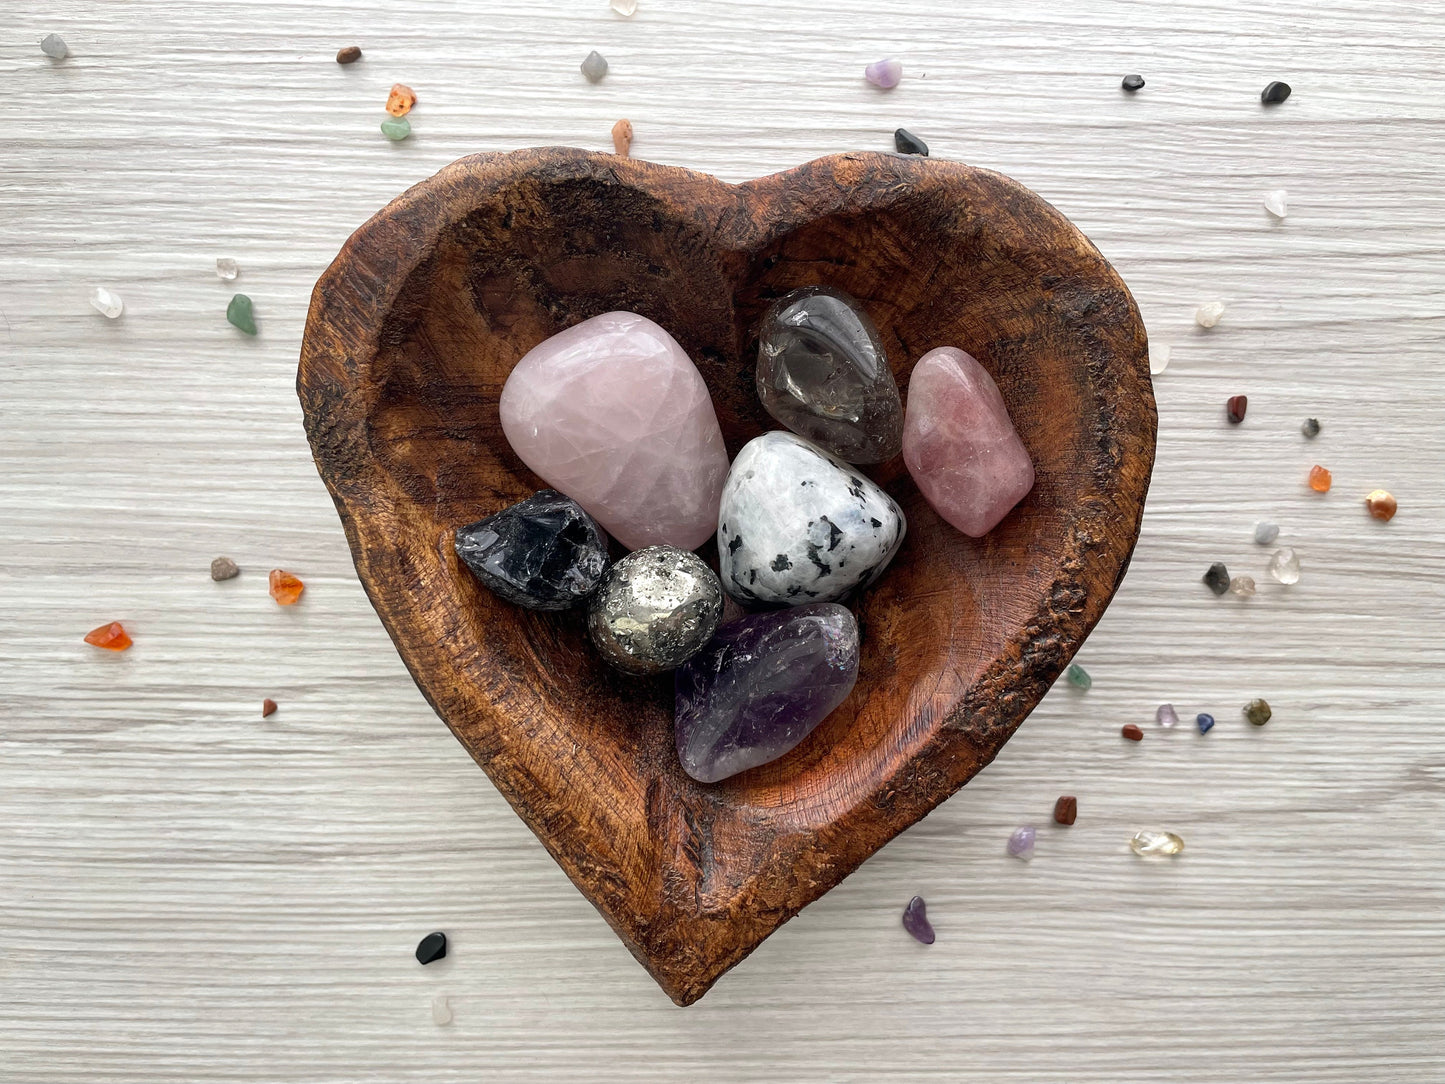 In Case of Grief, Crystal Set with Wooden Bowl and Recorded Meditation | Bereavement Gift | Sympathy Set | Crystals For Self Care